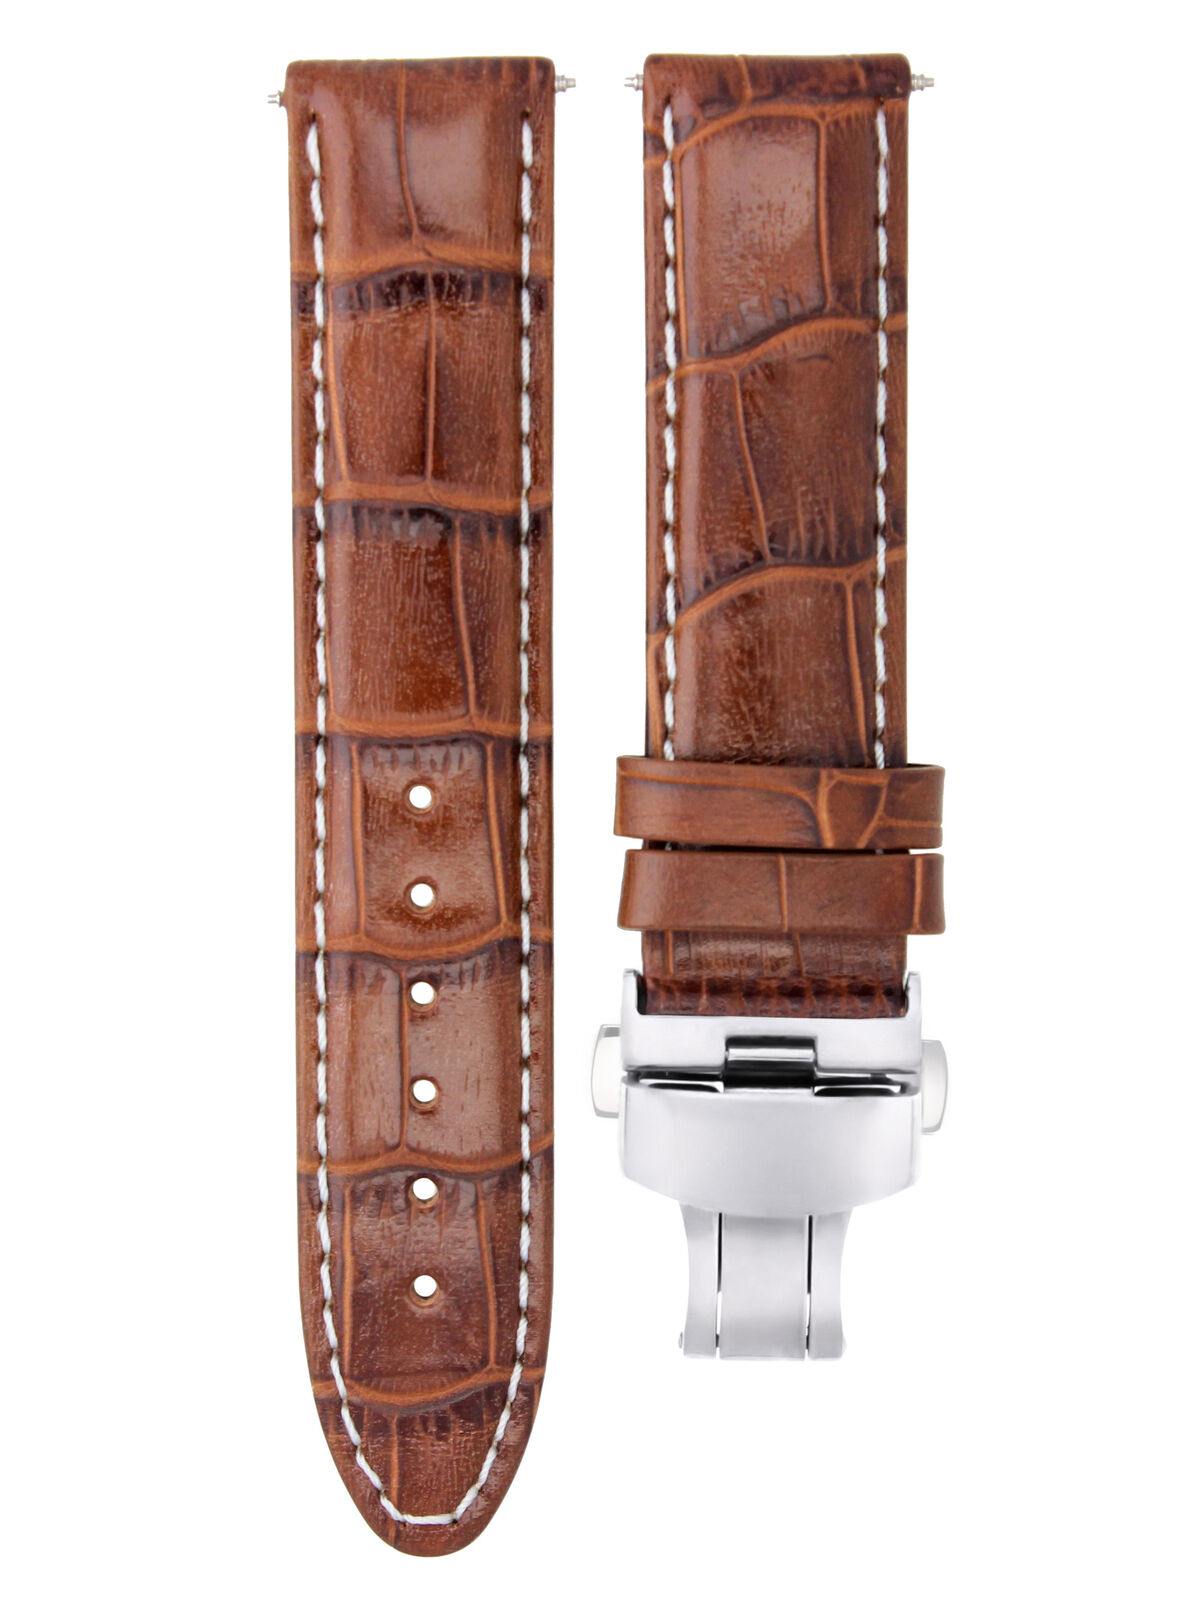 24MM LEATHER WATCH STRAP BAND CLASP FOR BAUME MERCIER CAPELAND L/BROWN WS TOP QY